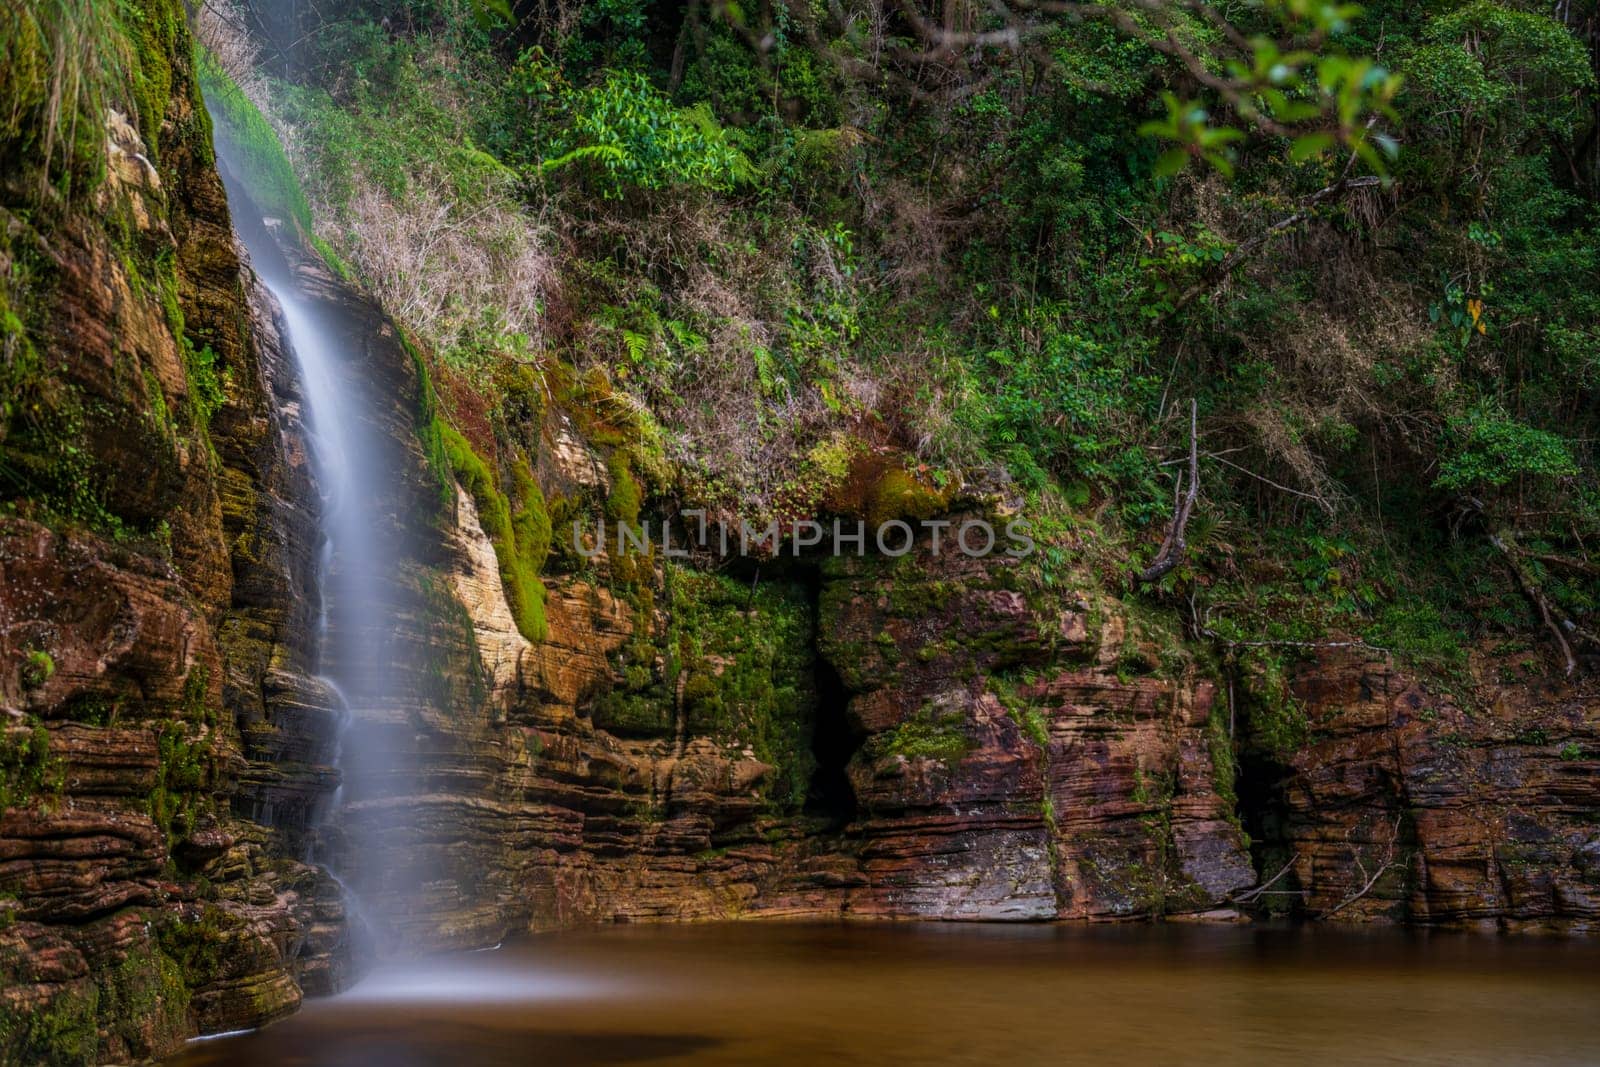 Tranquil long exposure photo captures a waterfall amidst lush foliage and stones.